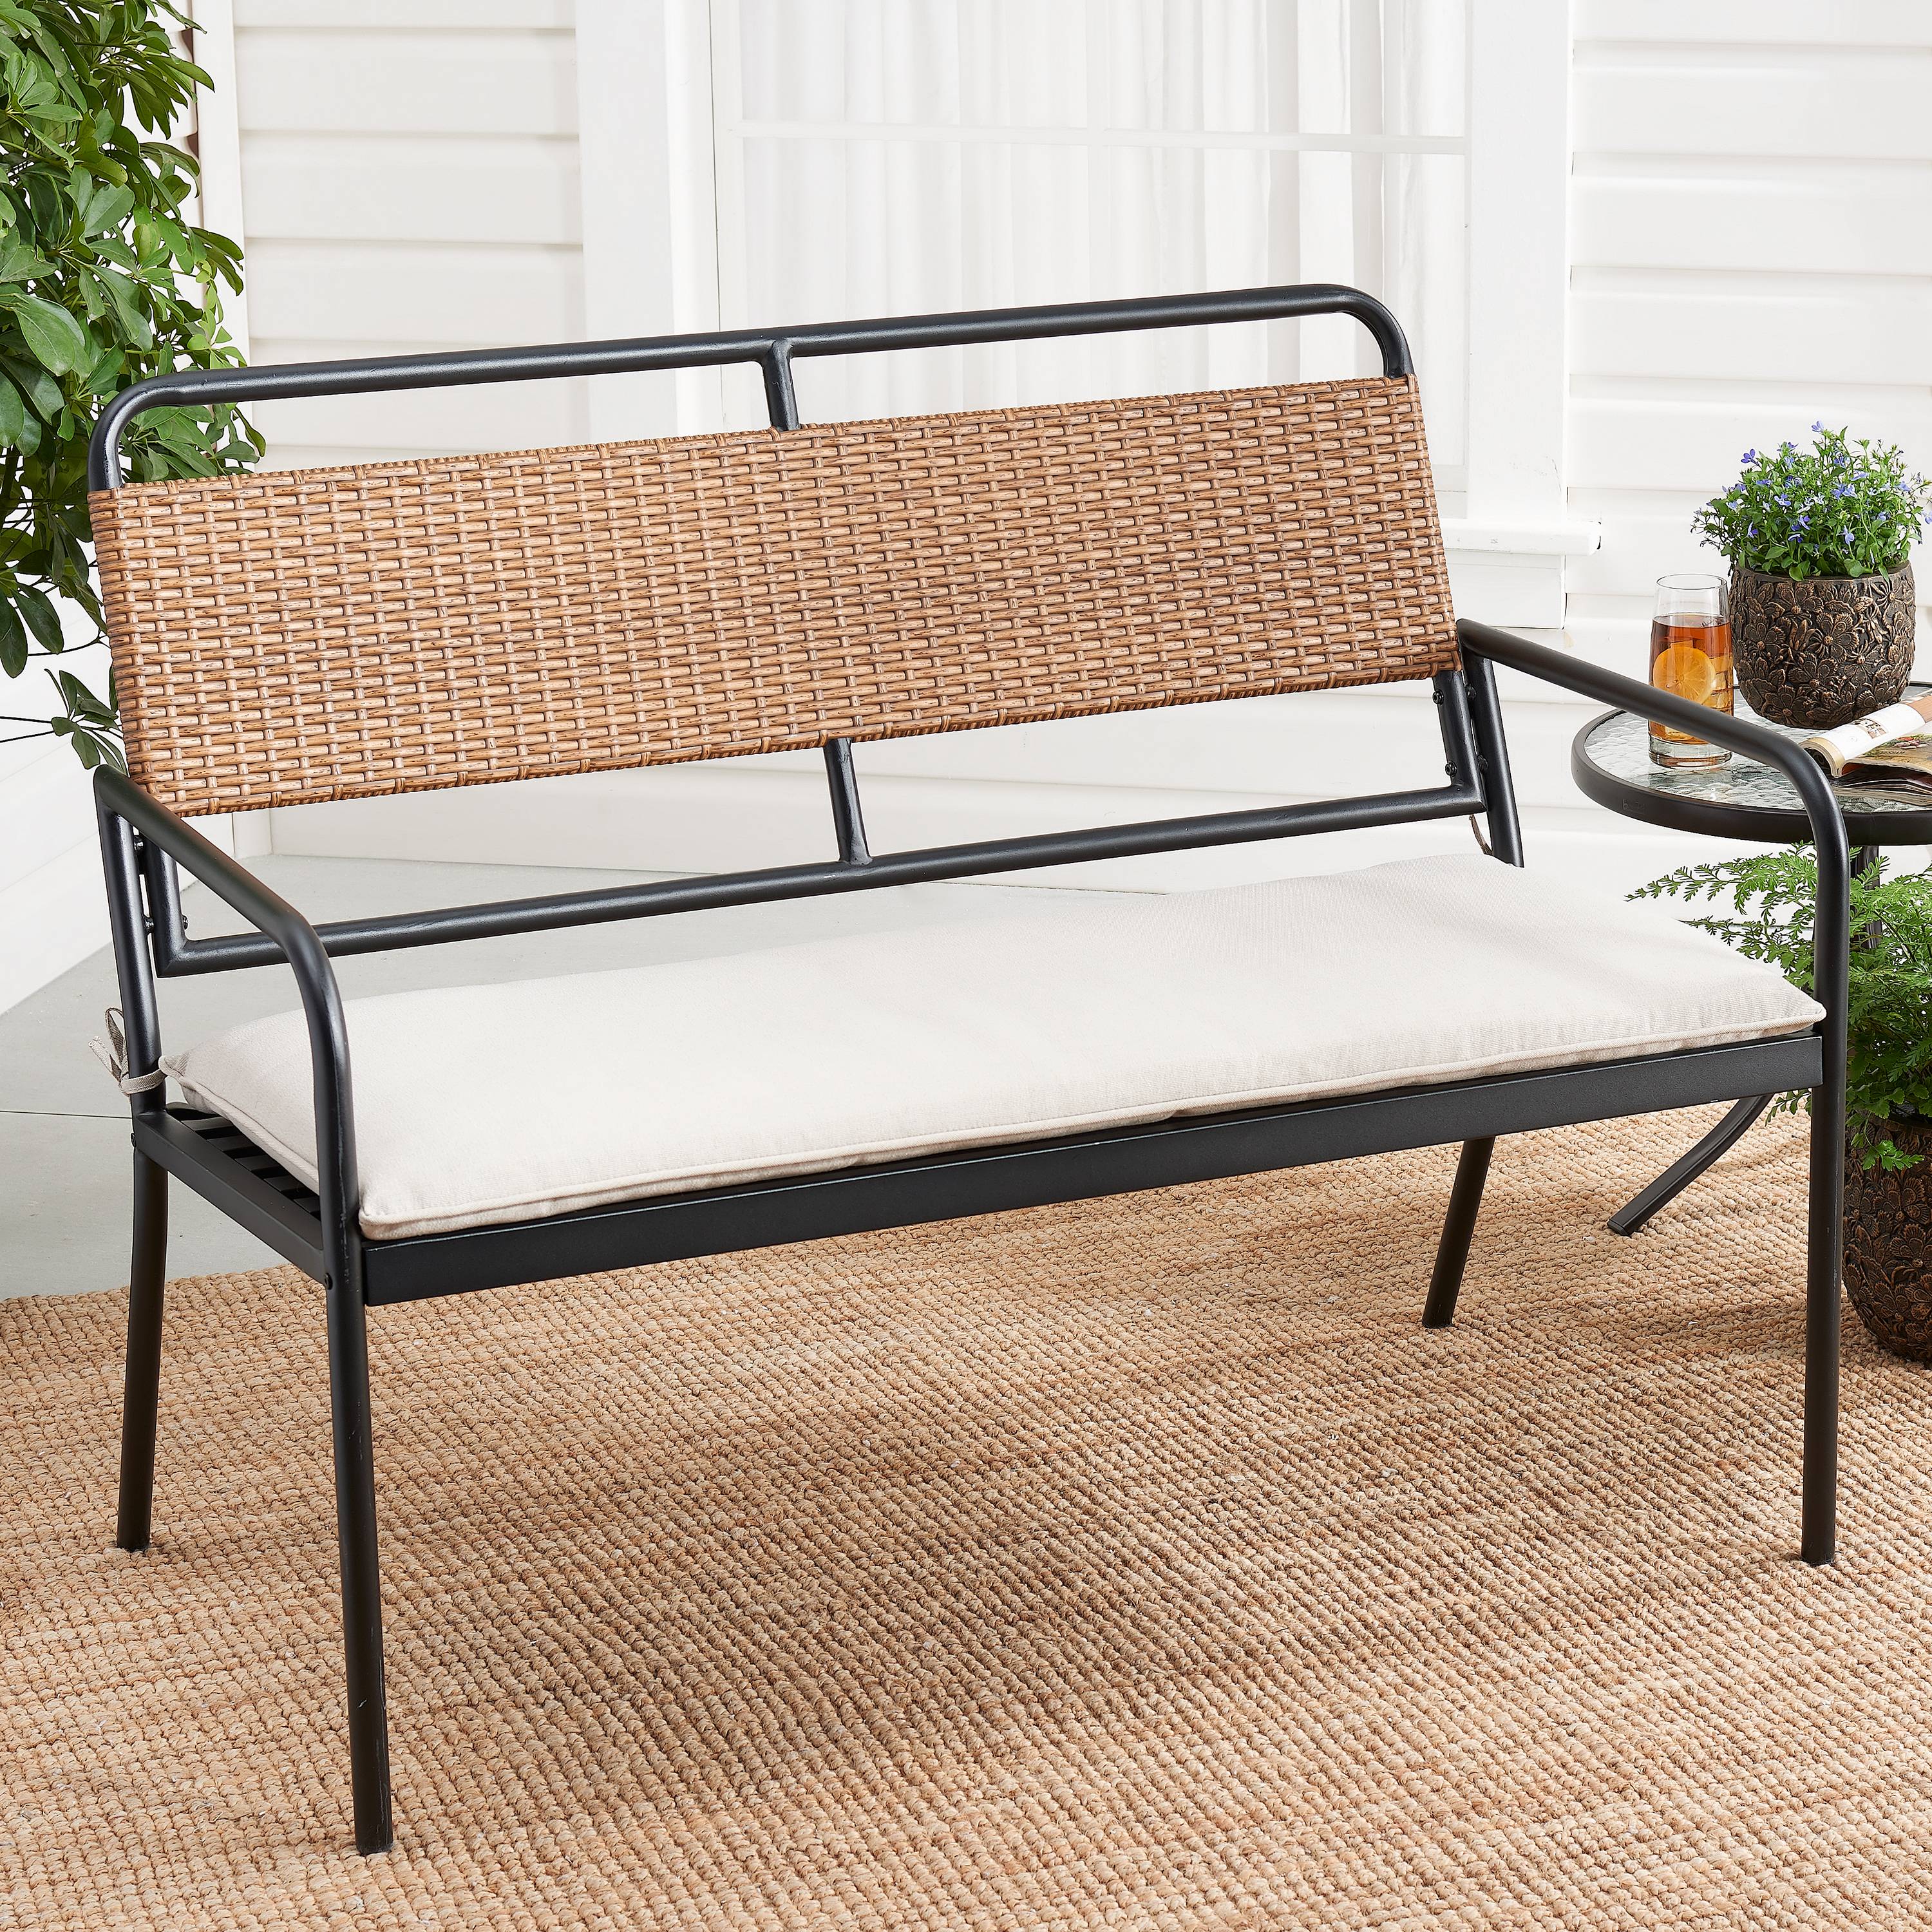 Mainstays Holcomb Outdoor Metal and Wicker Bench - image 1 of 4